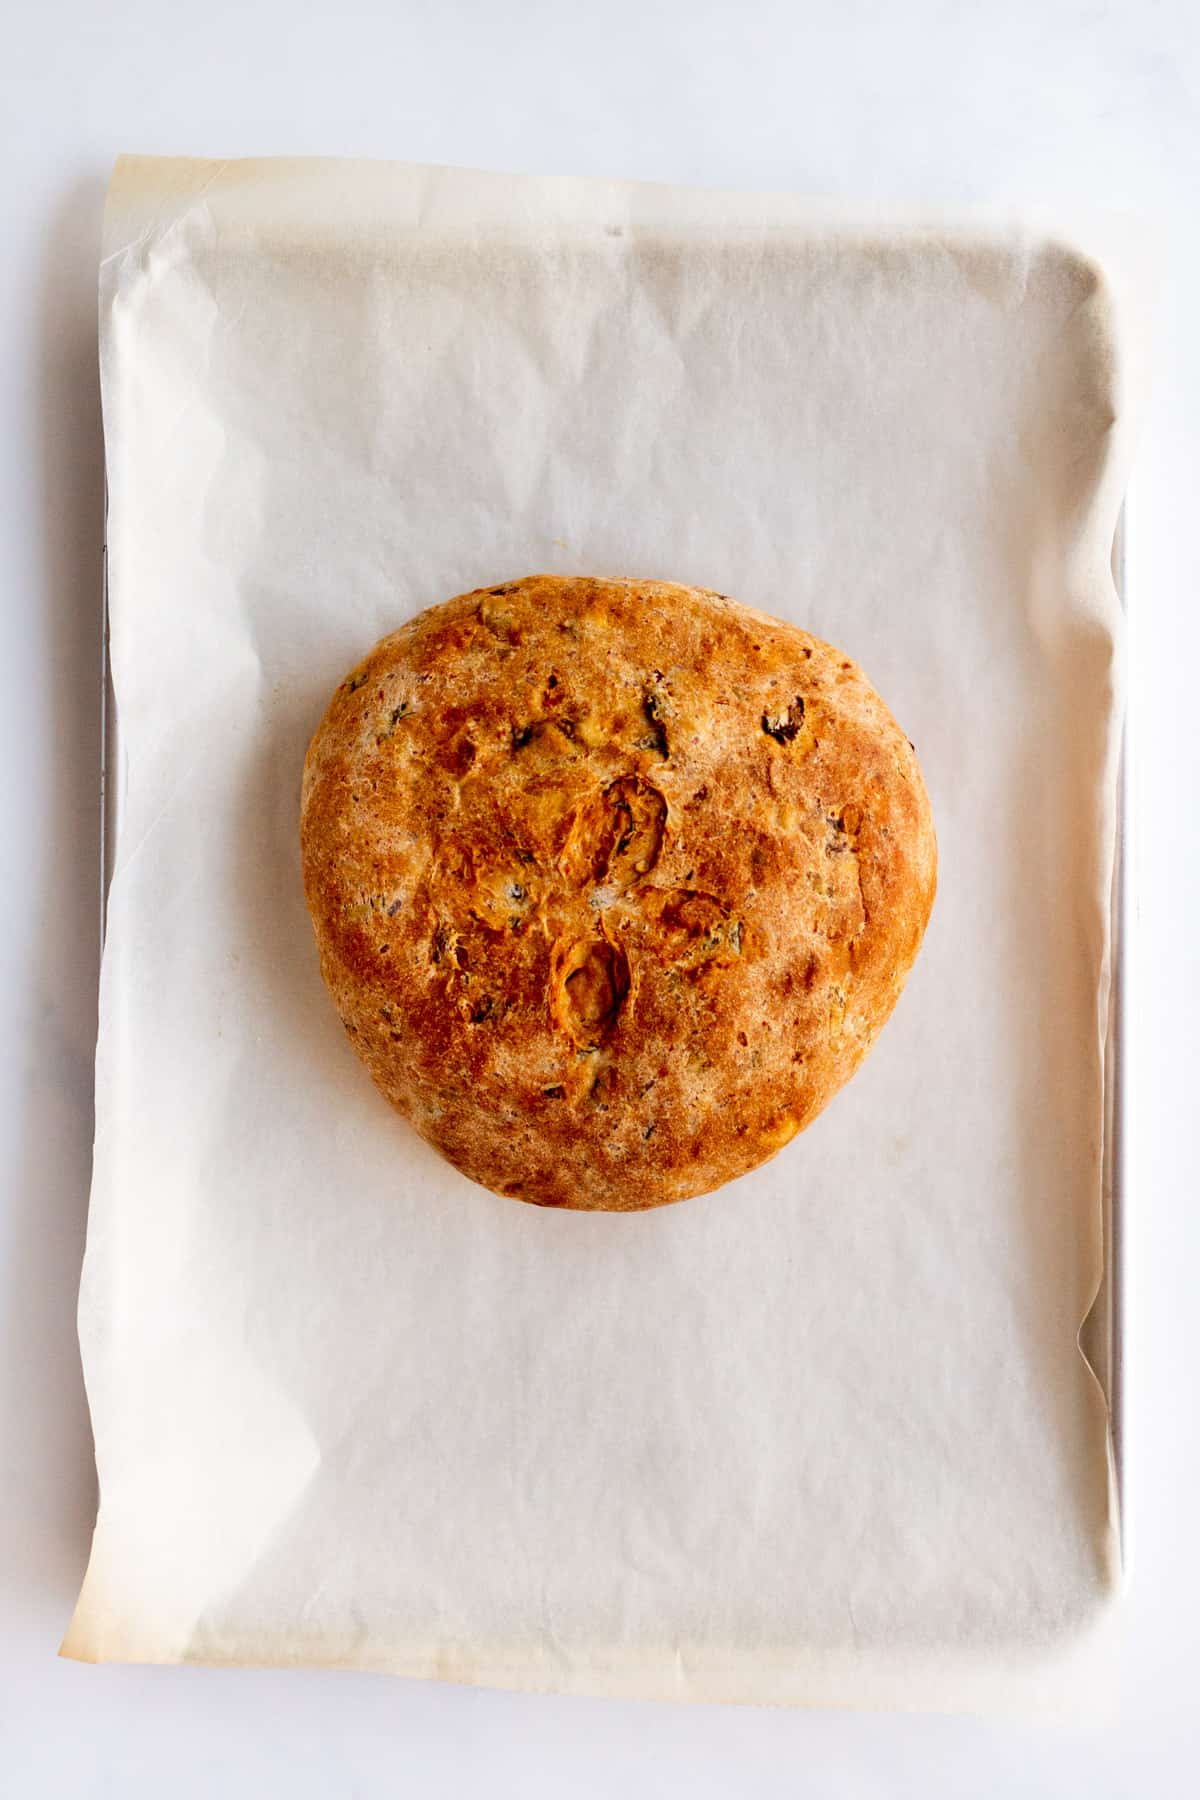 baked tomato basil bread on parchment paper